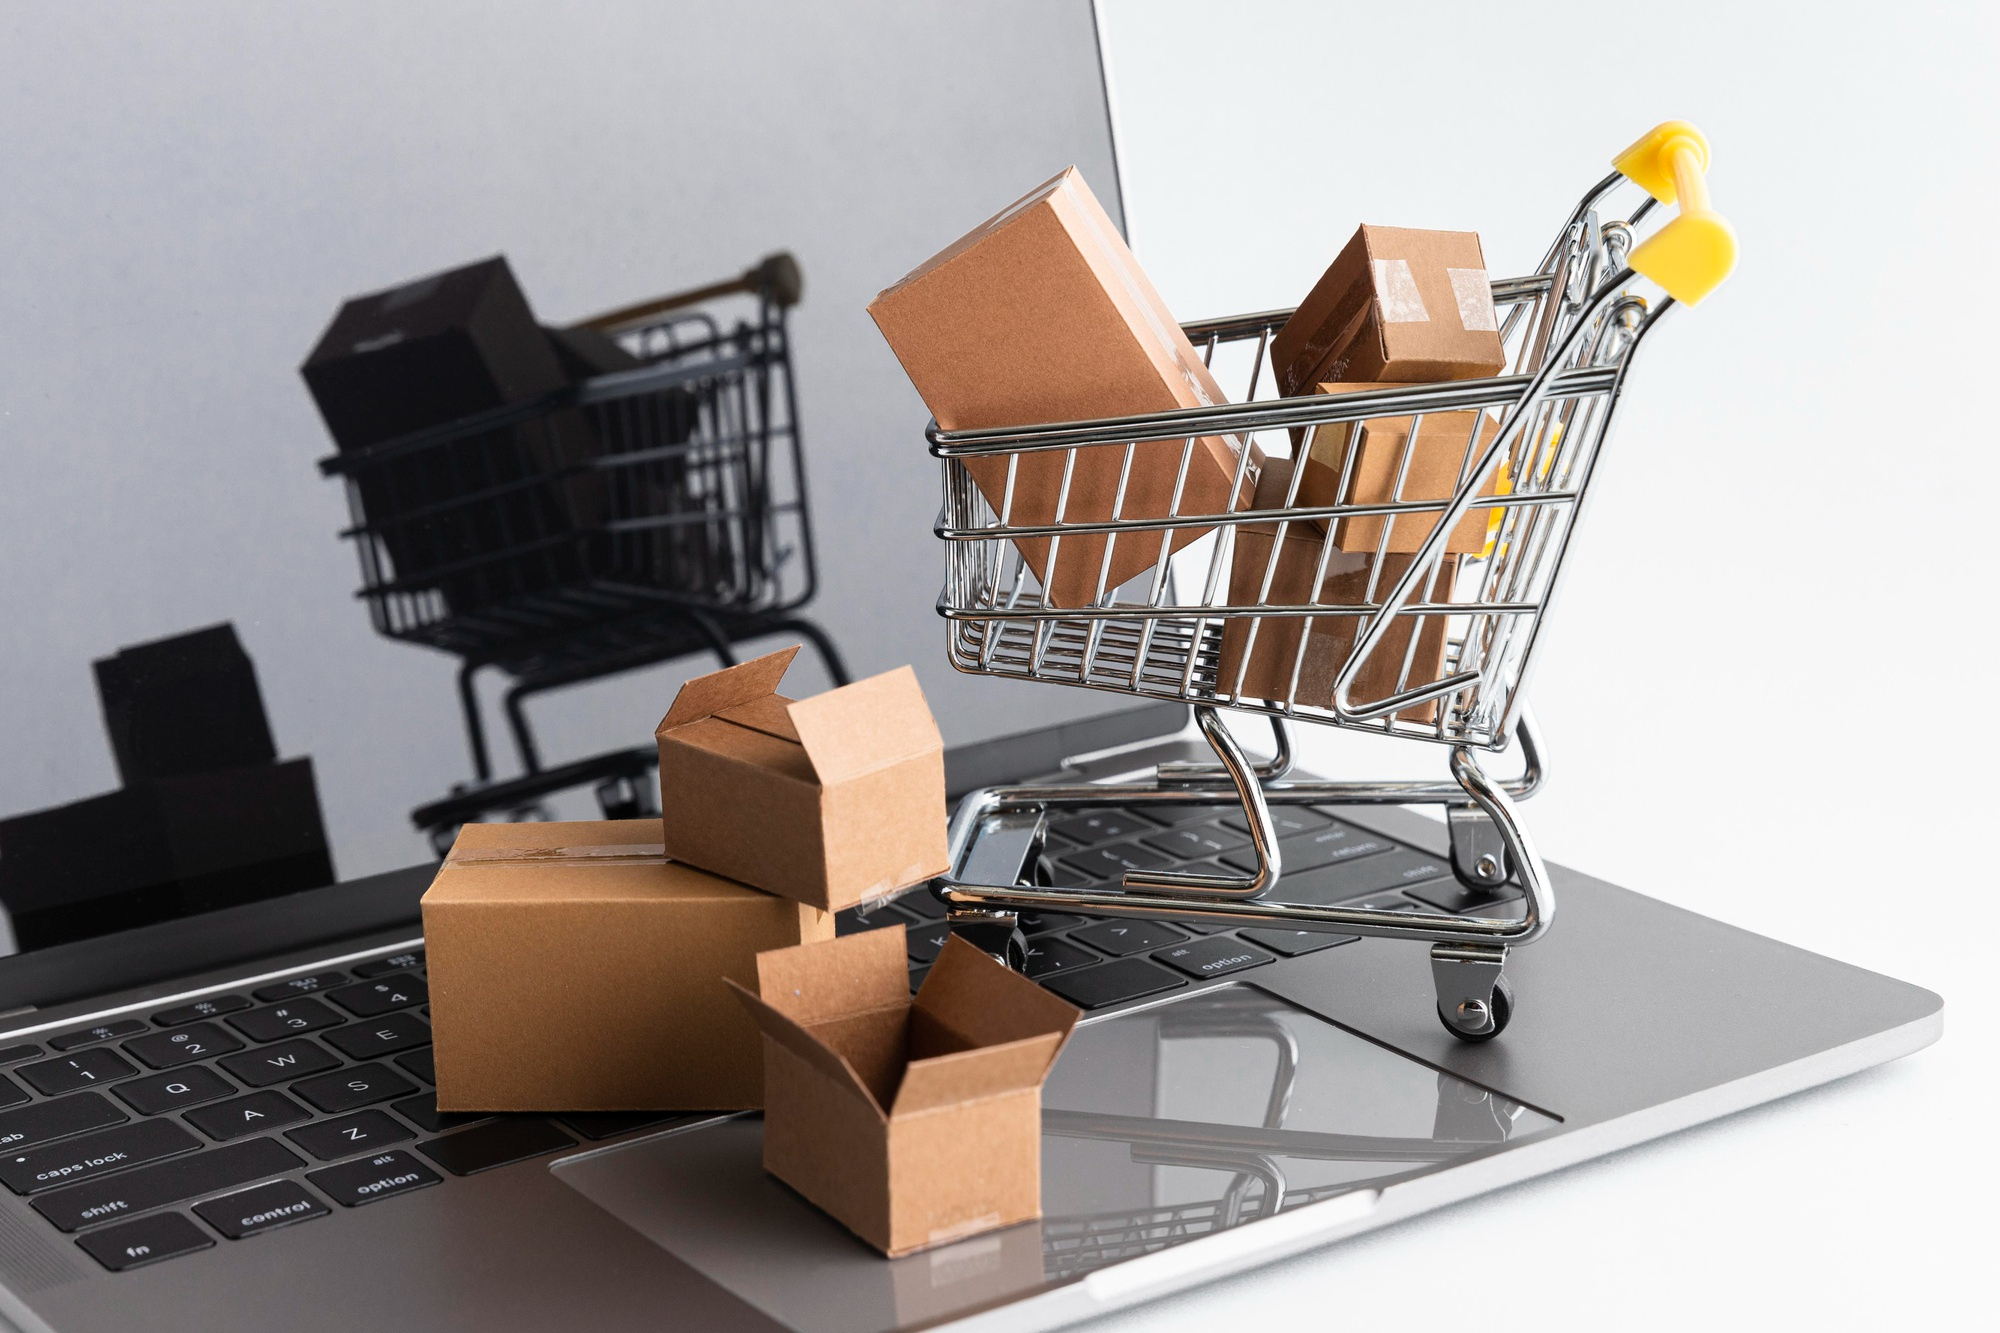 Wholesale purchasing for an online store - how to find suppliers?